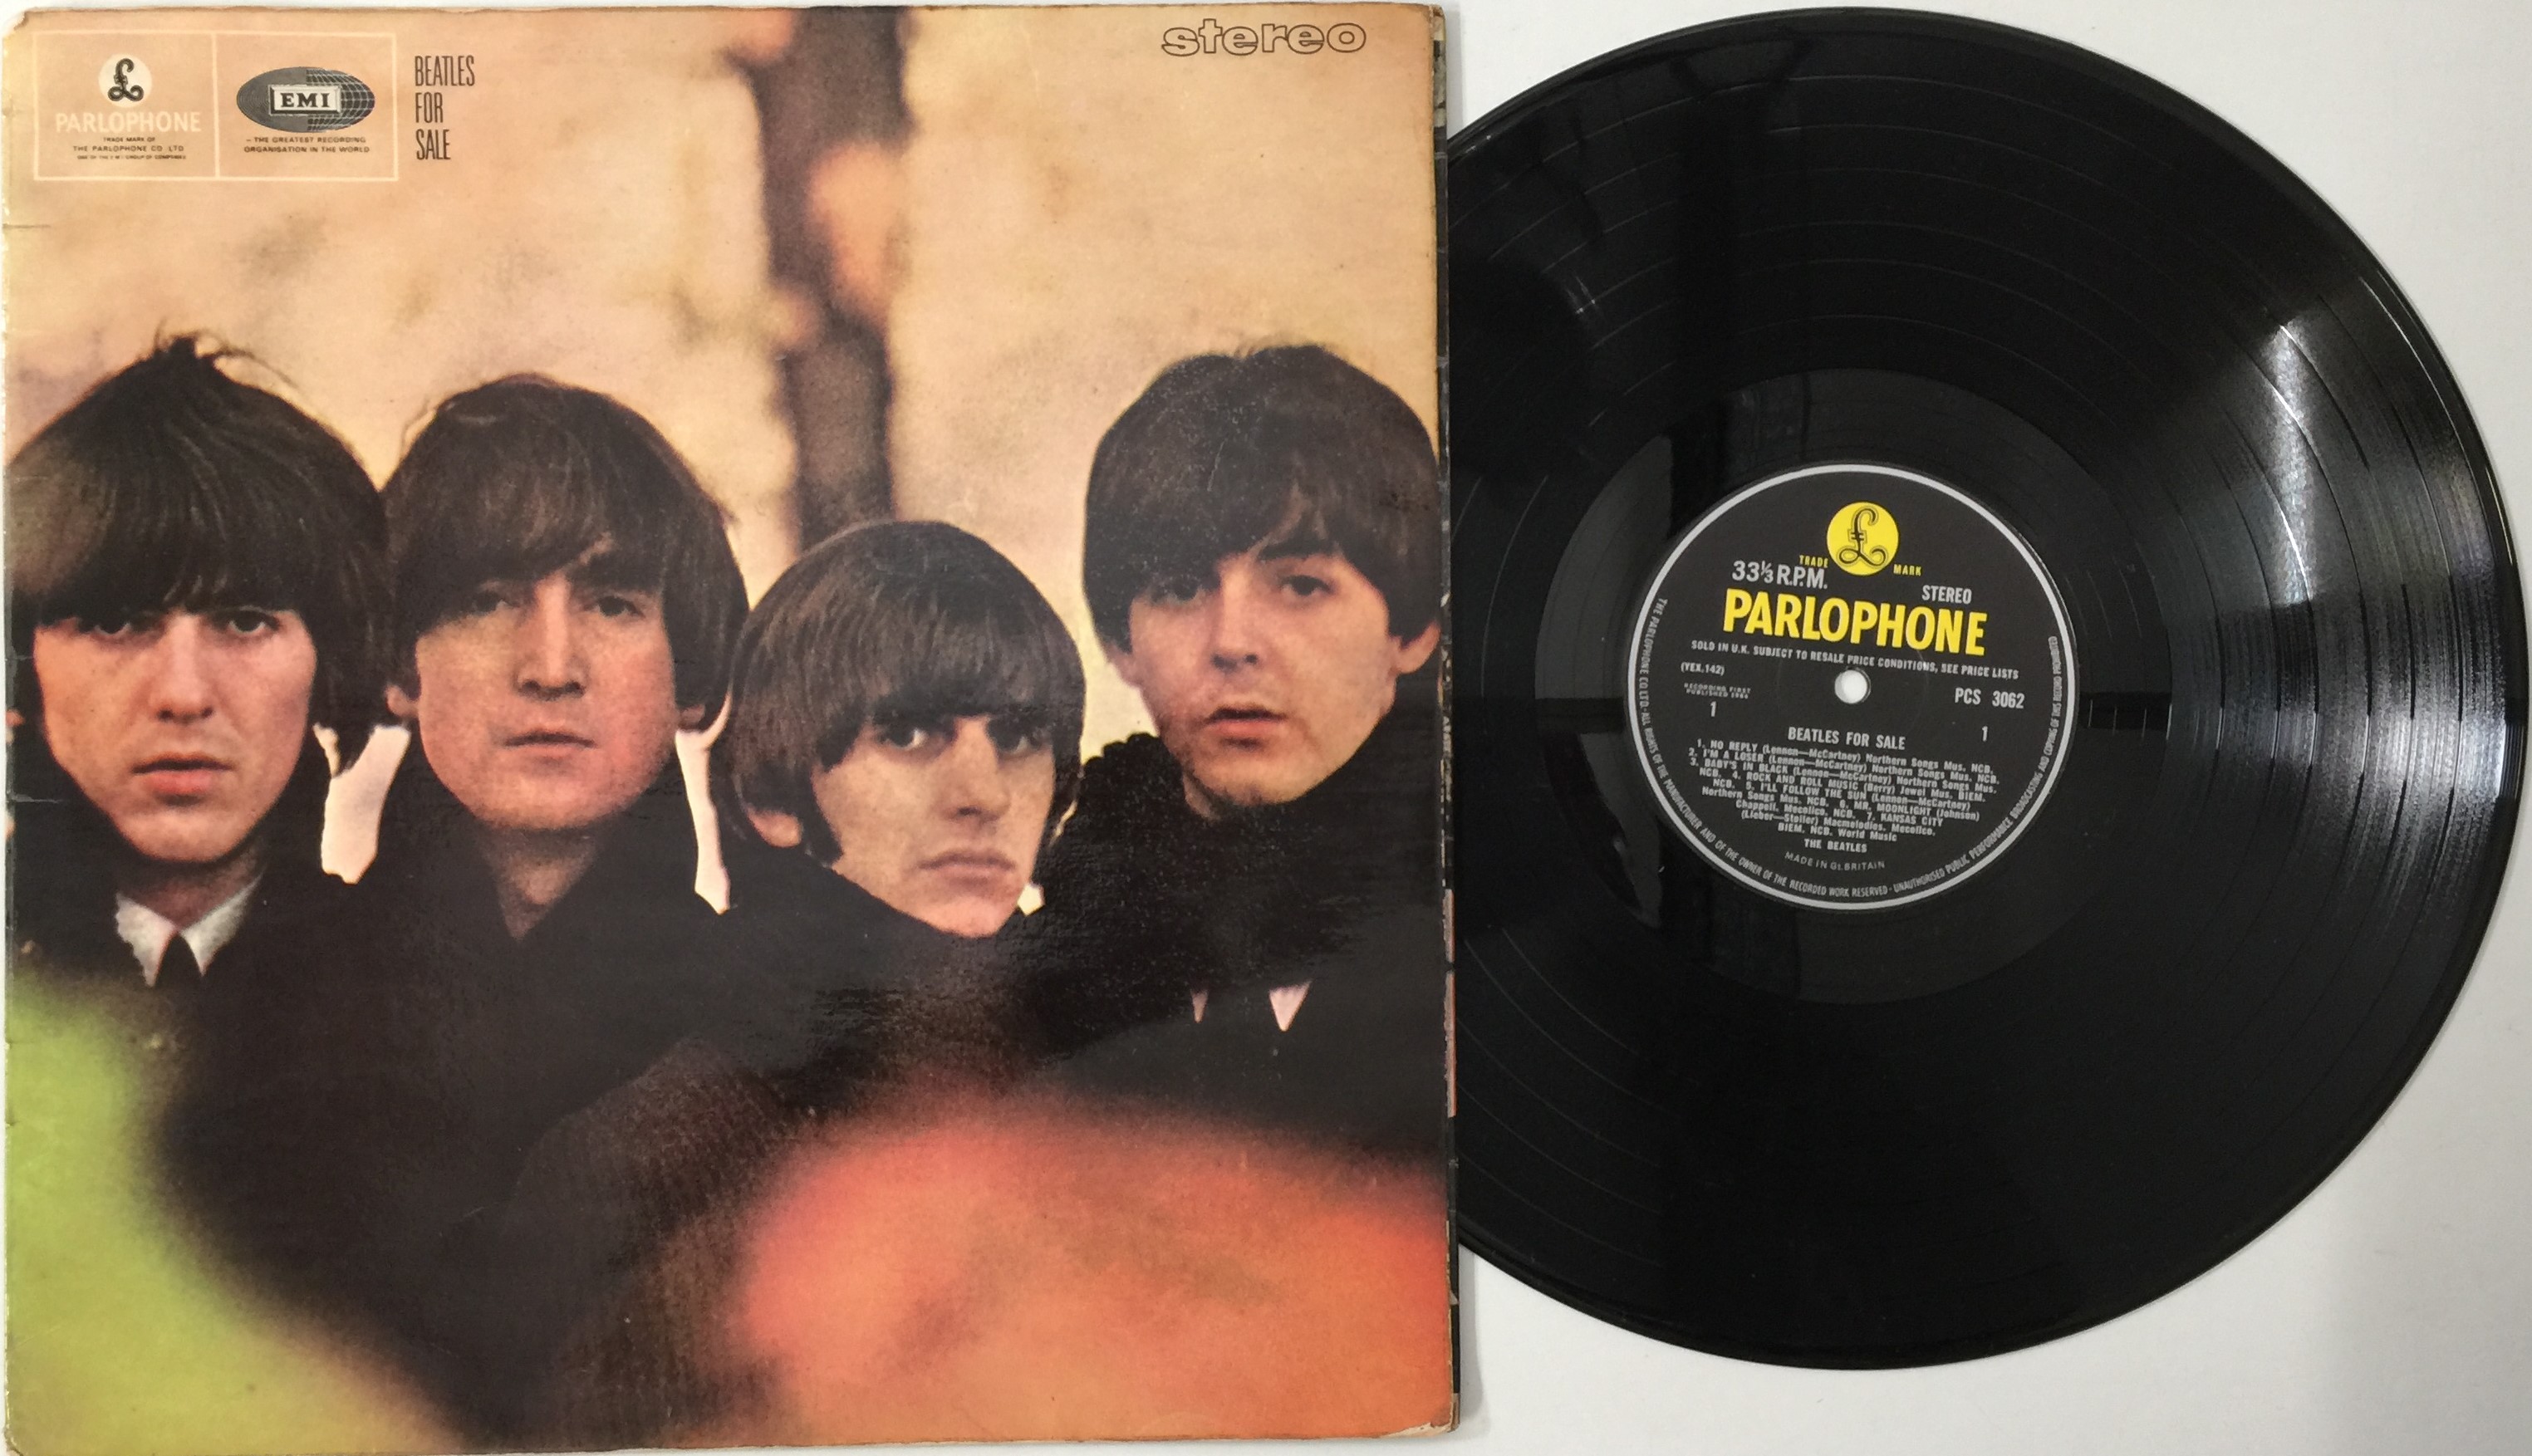 Lot 17 - THE BEATLES - BEATLES FOR SALE LP (UK STEREO -